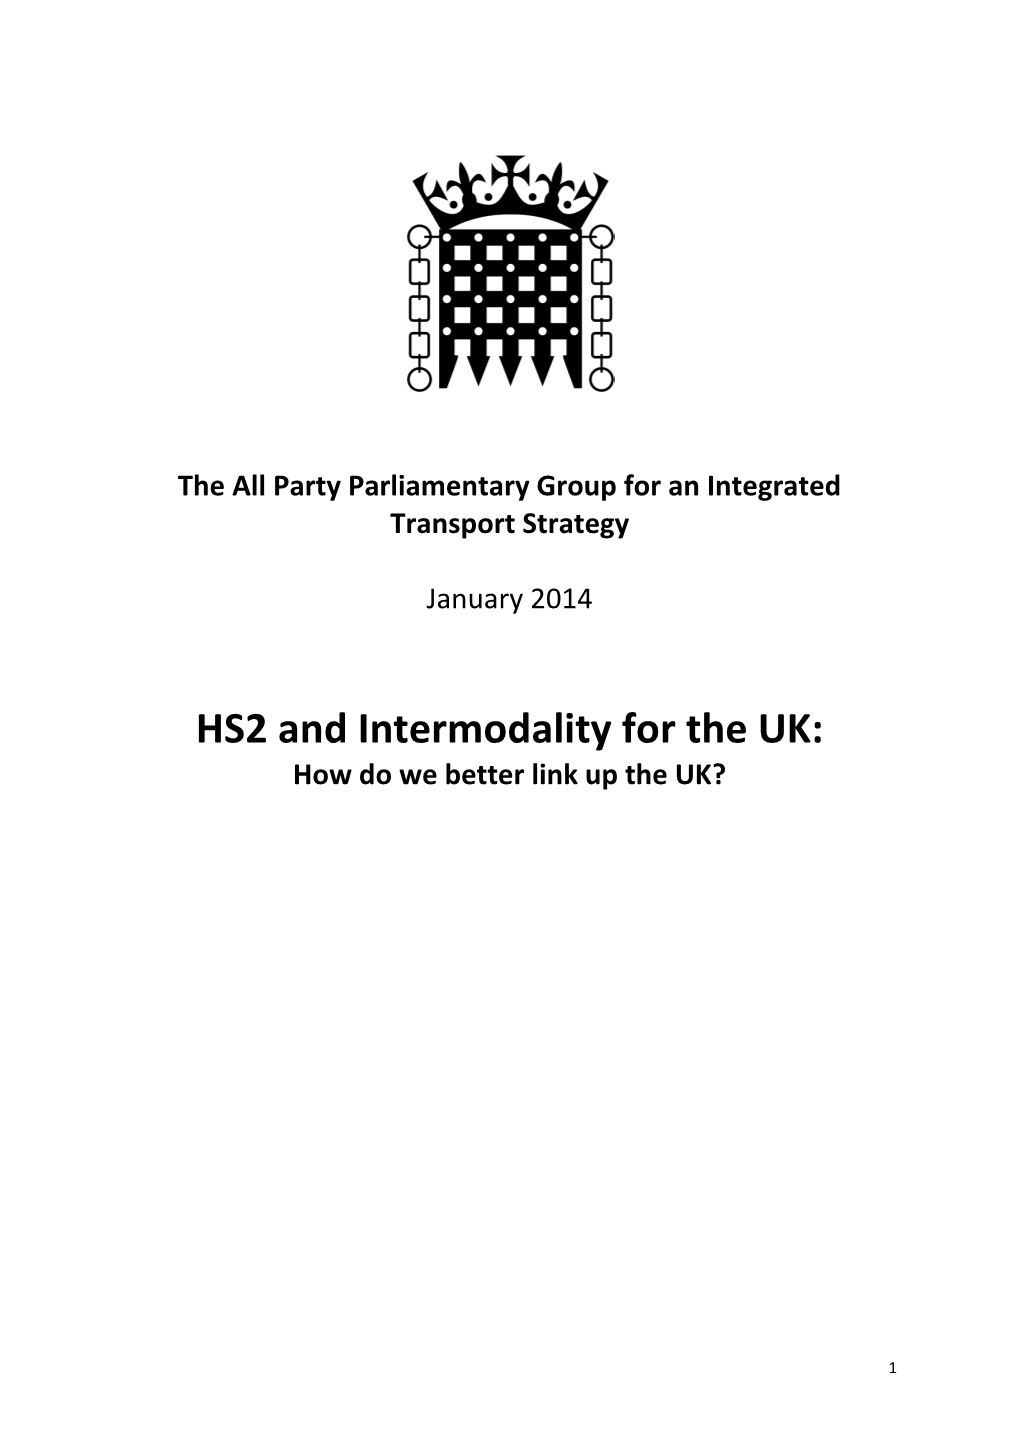 HS2 and Intermodality for the UK: How Do We Better Link up the UK?